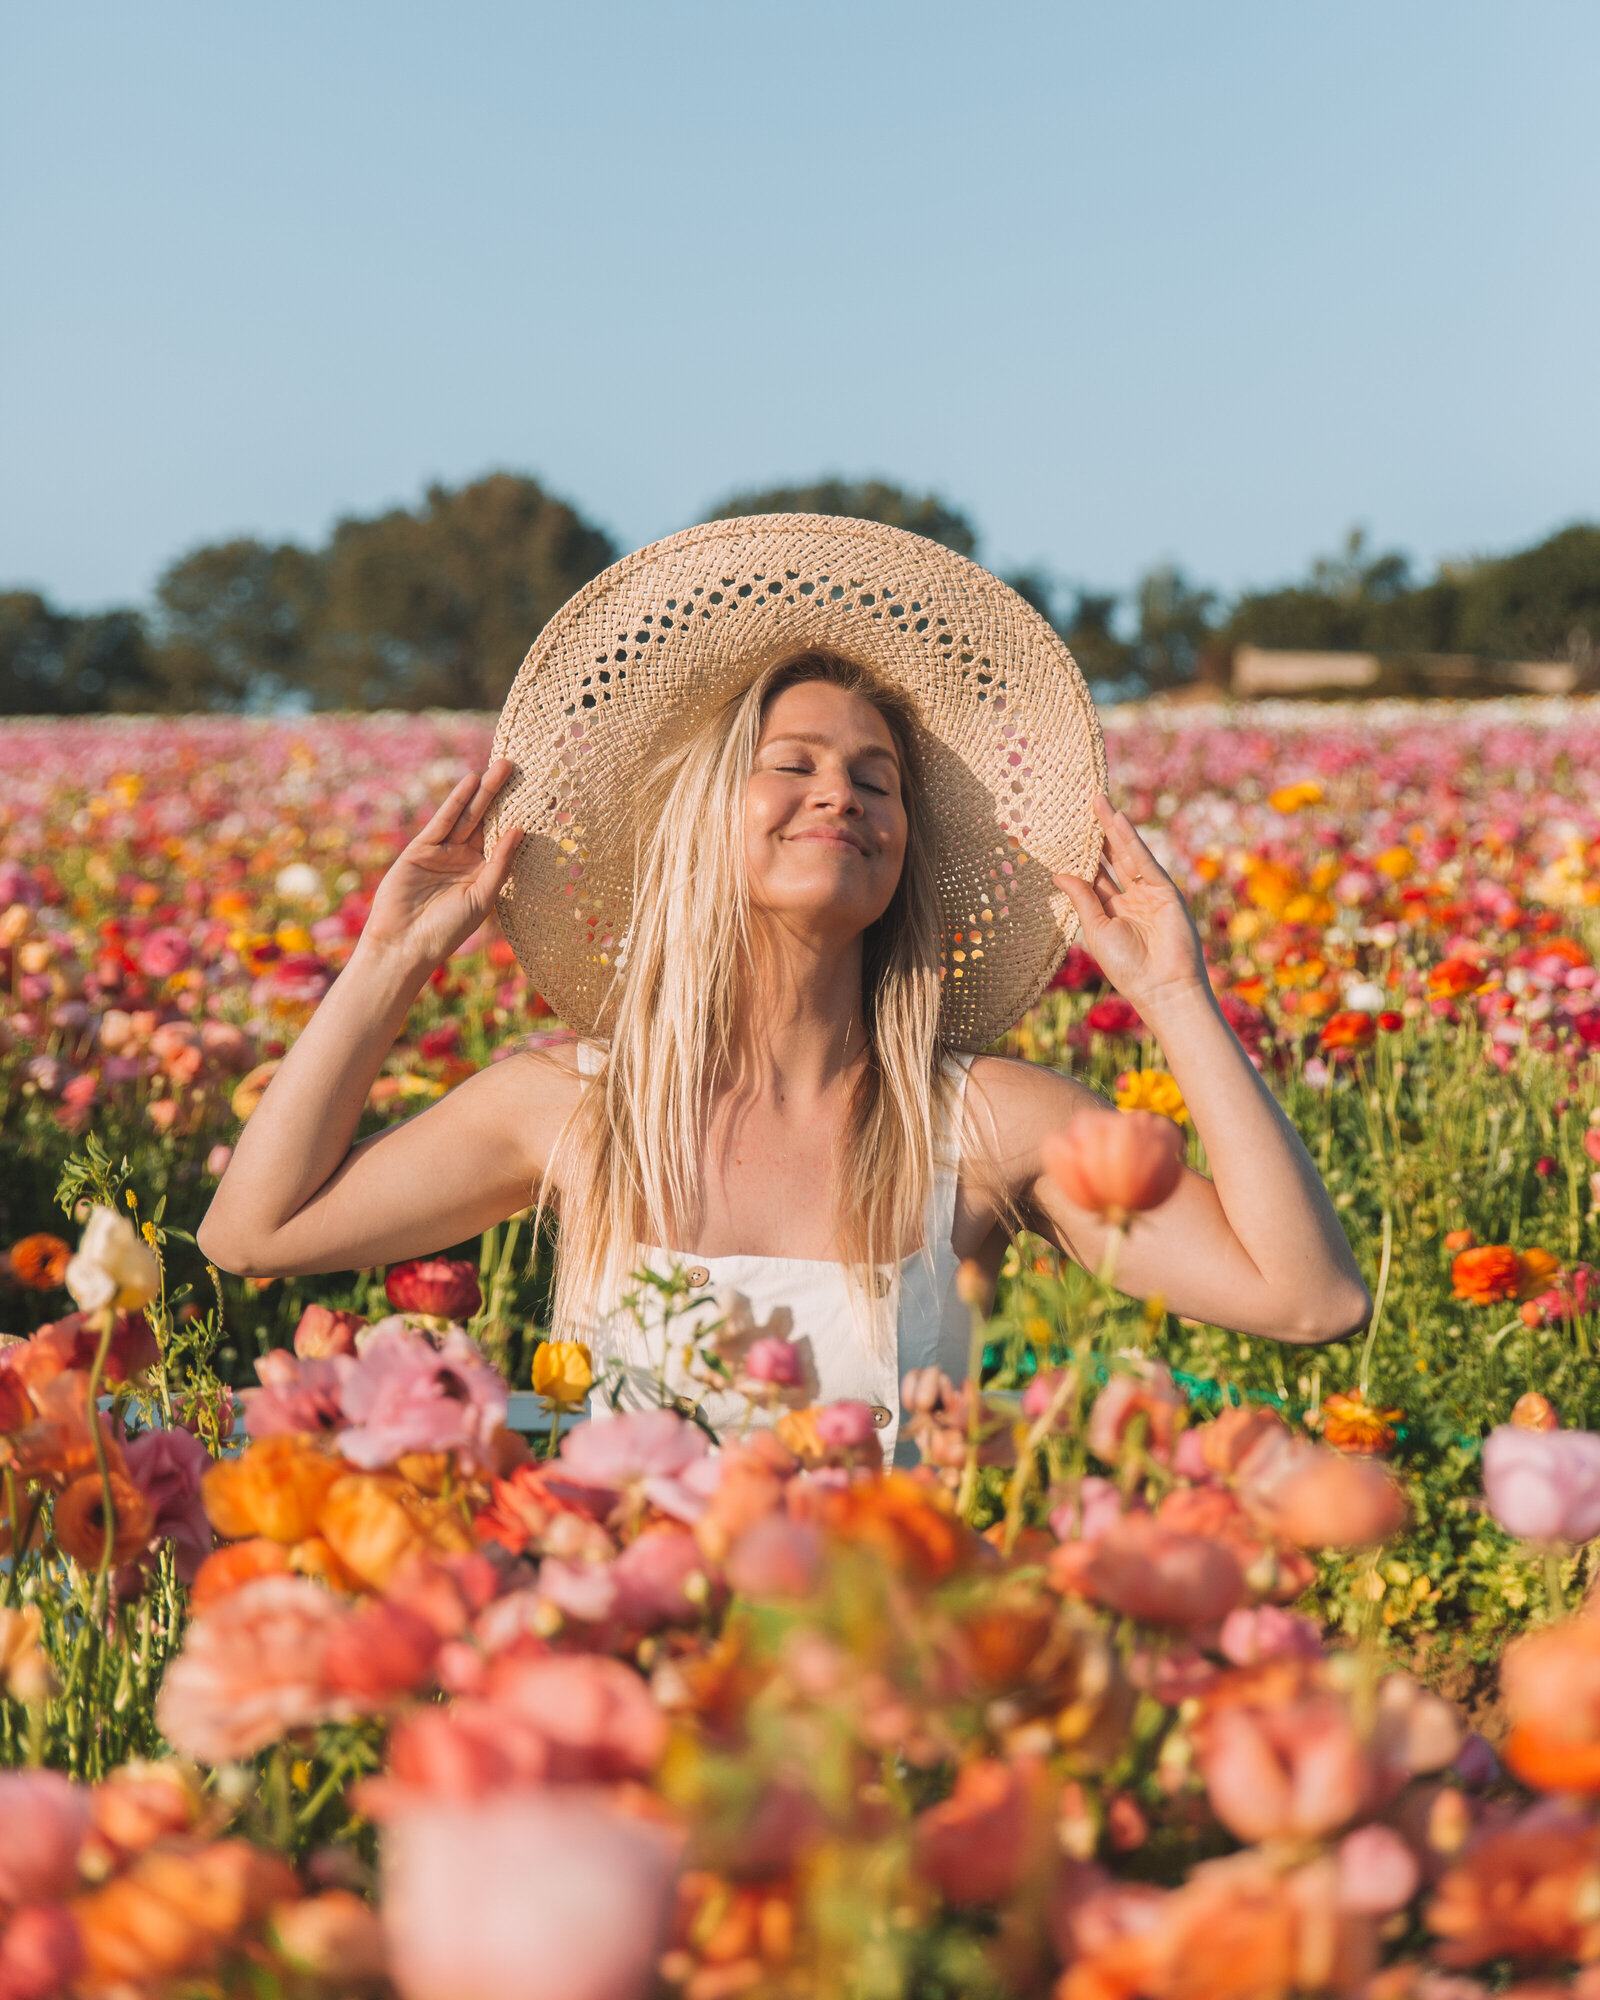 Chelsea Loren Branding photographer The Blonde Abroad in the ranunculus flower fields at Carlsbad in San Diego, California